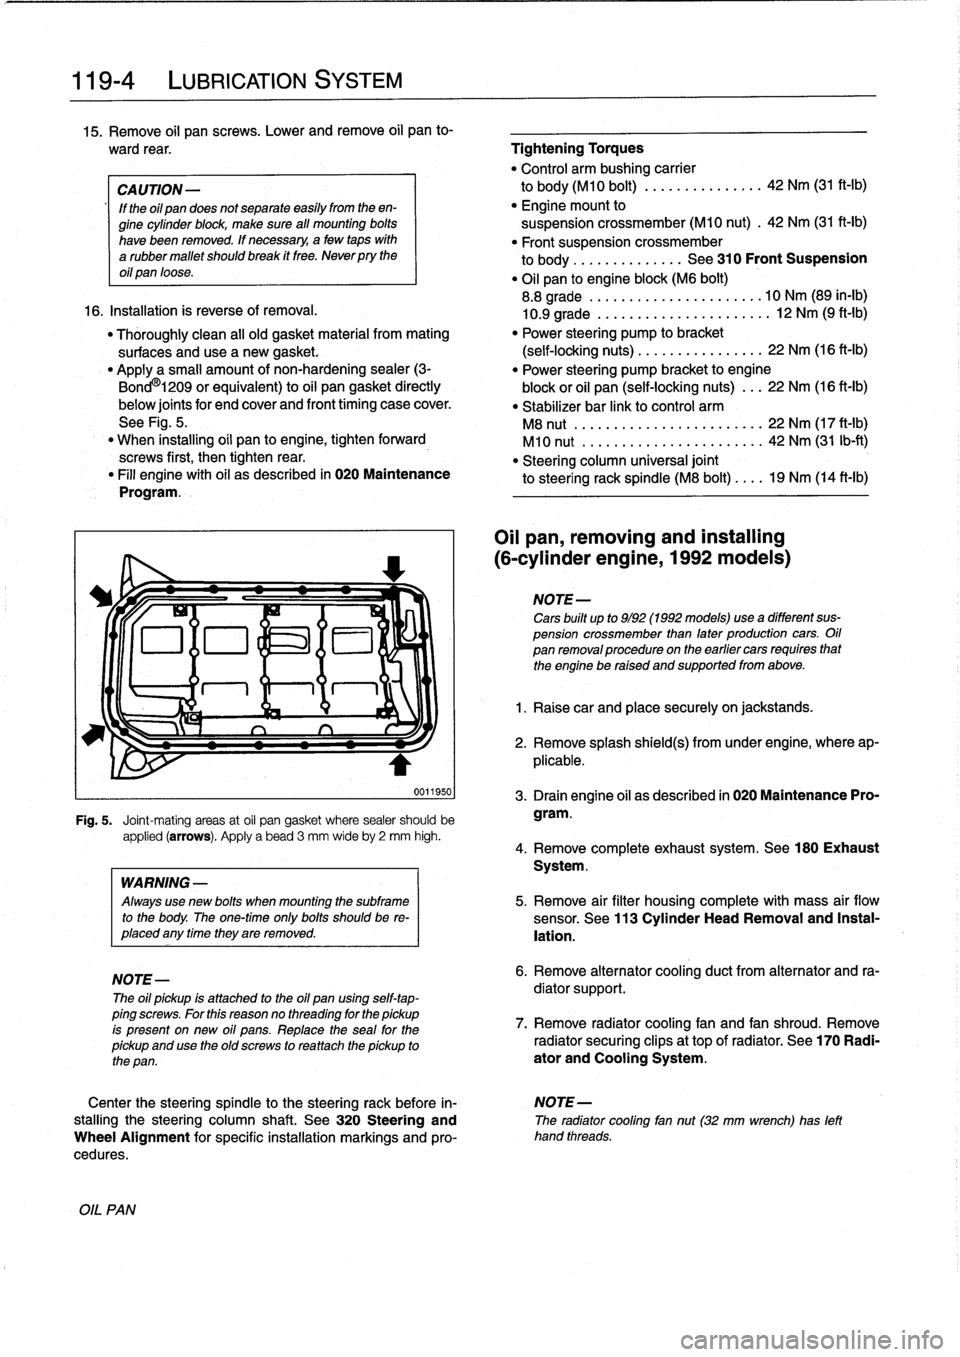 BMW 318i 1997 E36 Workshop Manual 
119-
4

	

LUBRICATION
SYSTEM

15
.
Remove
oil
pan
screws
.
Lower
andremove
oil
pan
to-

ward
rear
.

	

Tightening
Torques

"
Control
arm
bushing
carrier

CAUTION-

	

to
body(M10
bolt)
............